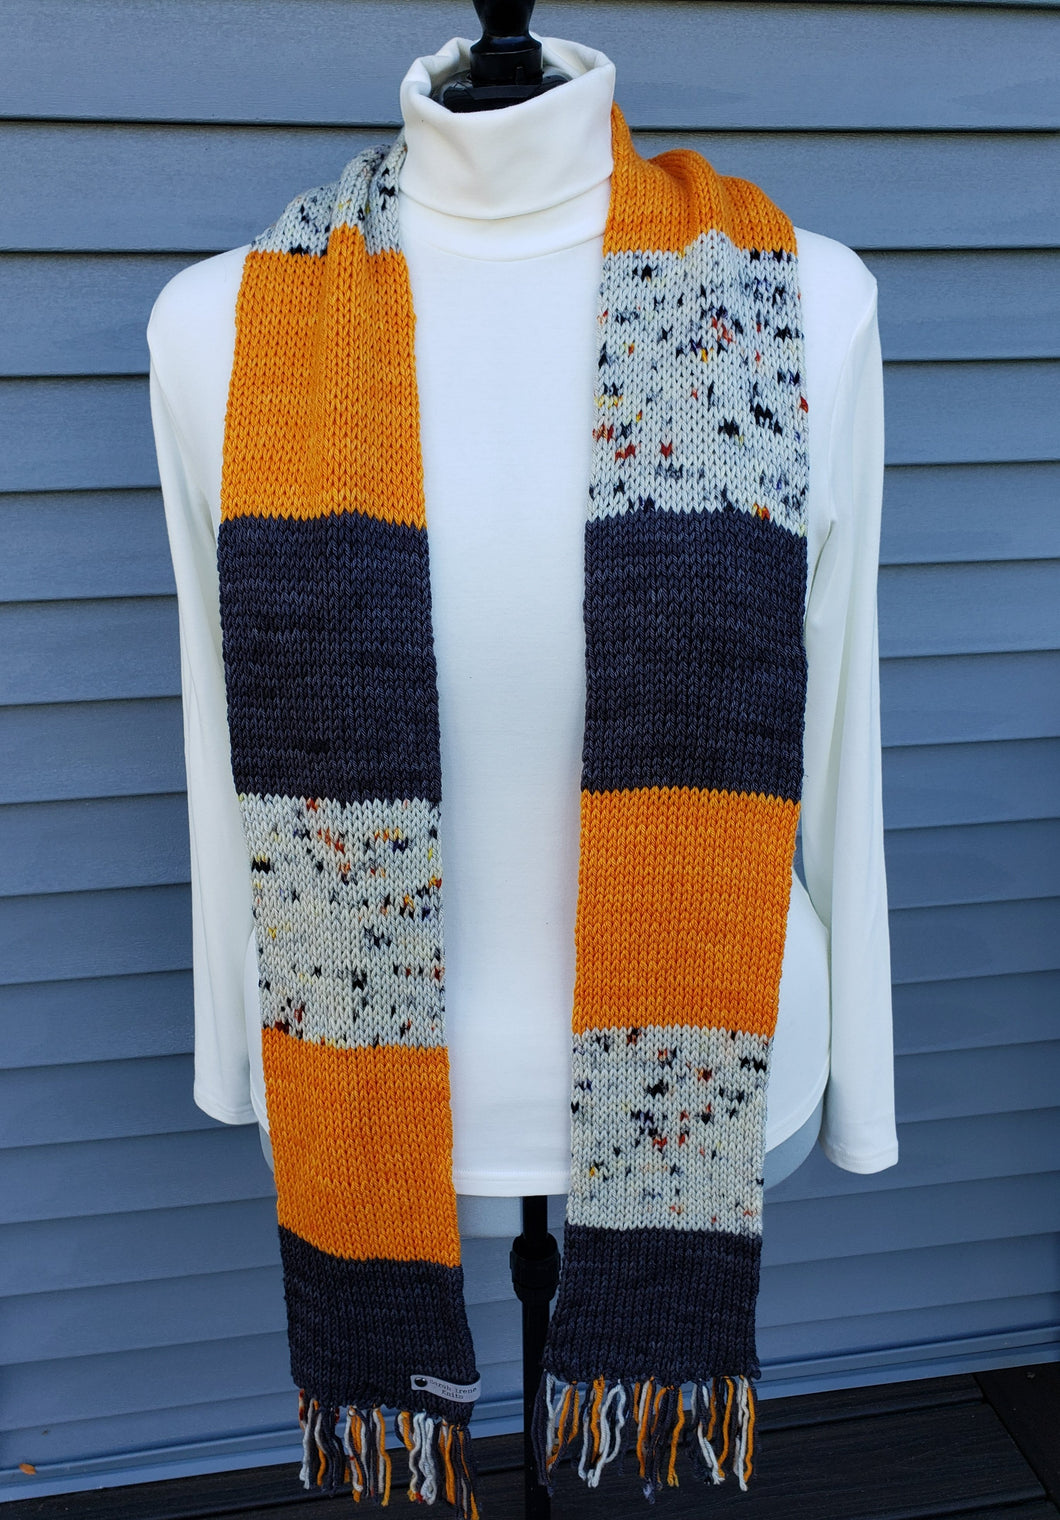 Scarf on model with black/grey, orange, and matching grey speckled blocks.